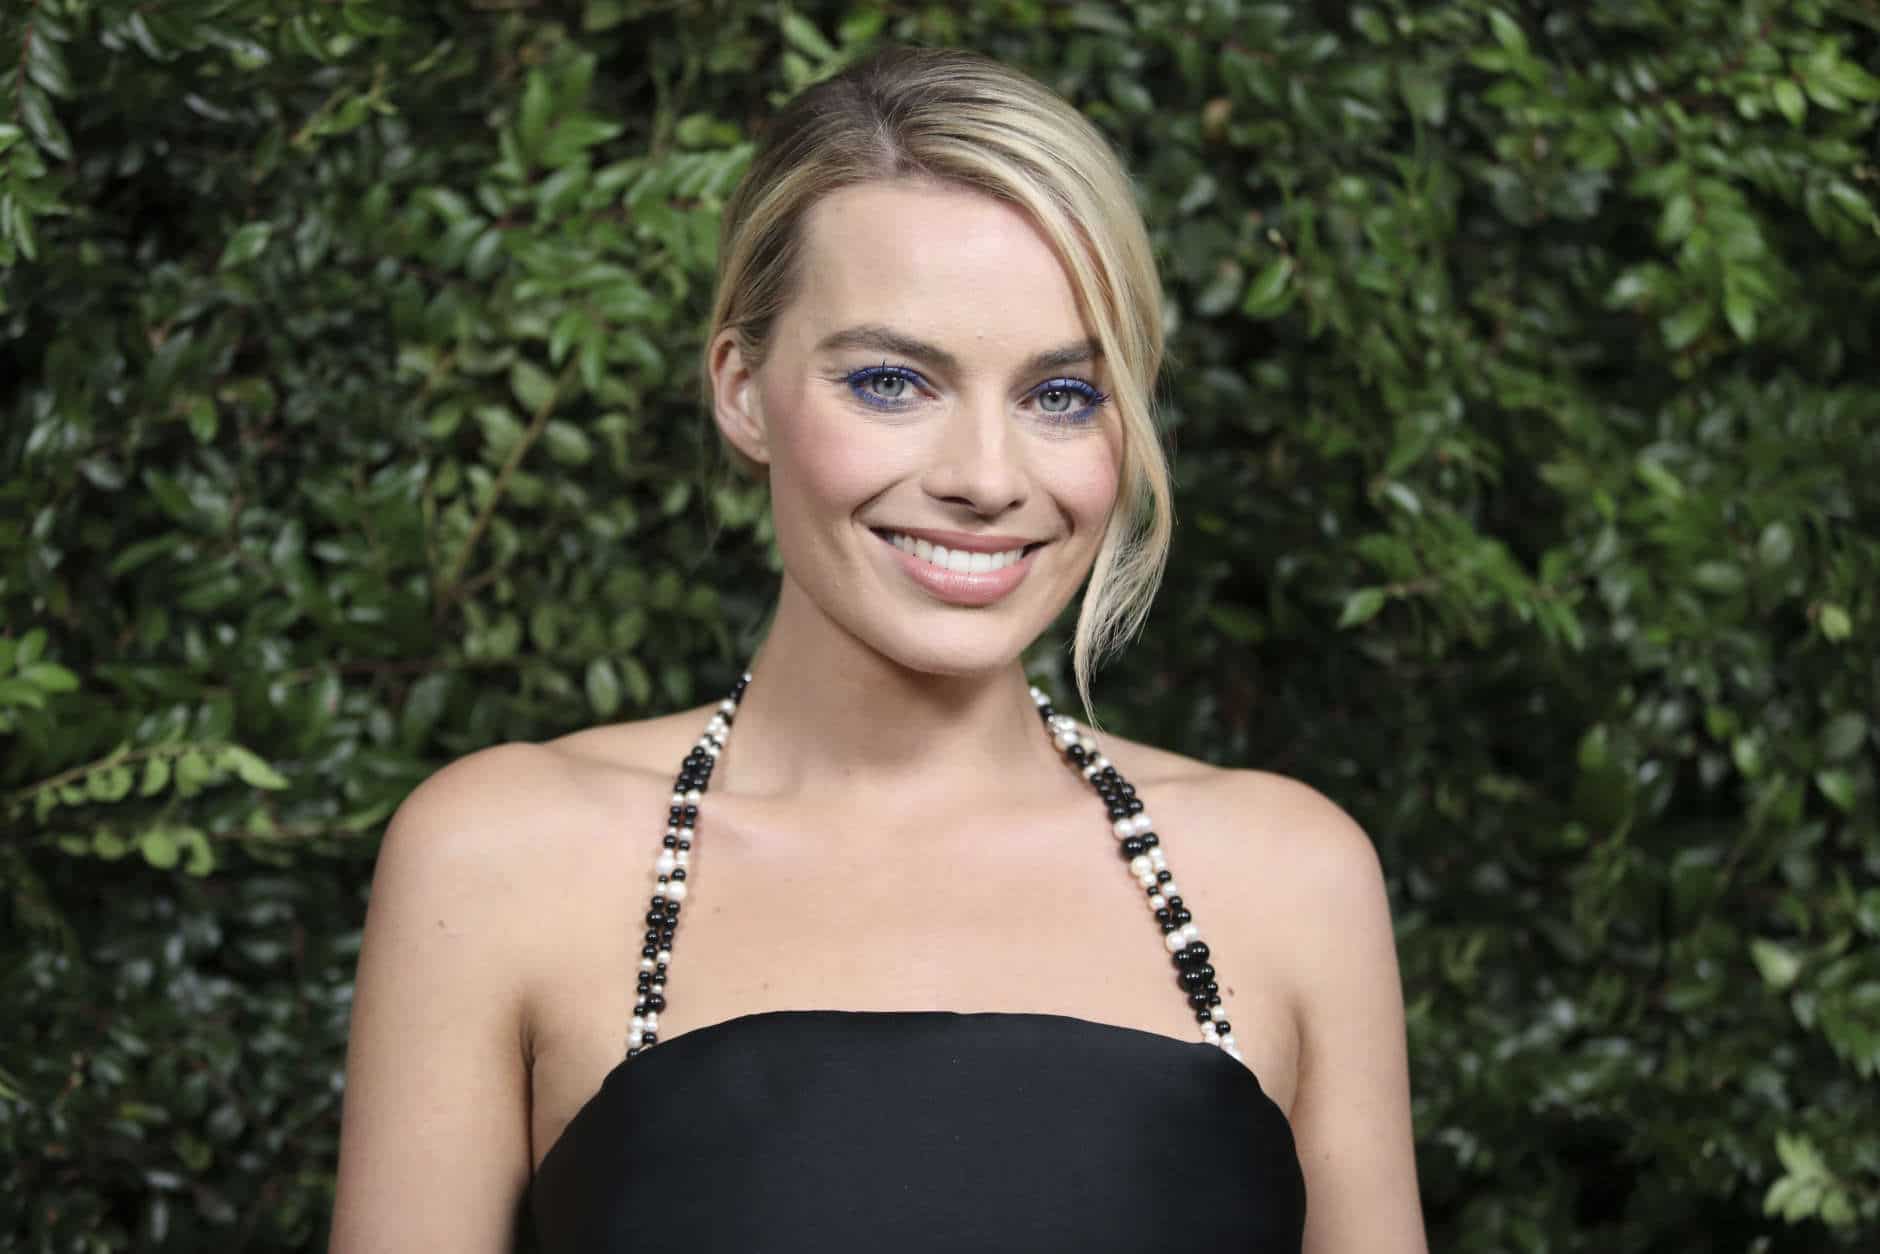 Margot Robbie arrives at the CHANEL Pre-Oscar Dinner at Madeo Restaurant on Saturday, March 3, 2018, in Los Angeles. (Photo by Omar Vega/Invision/AP)